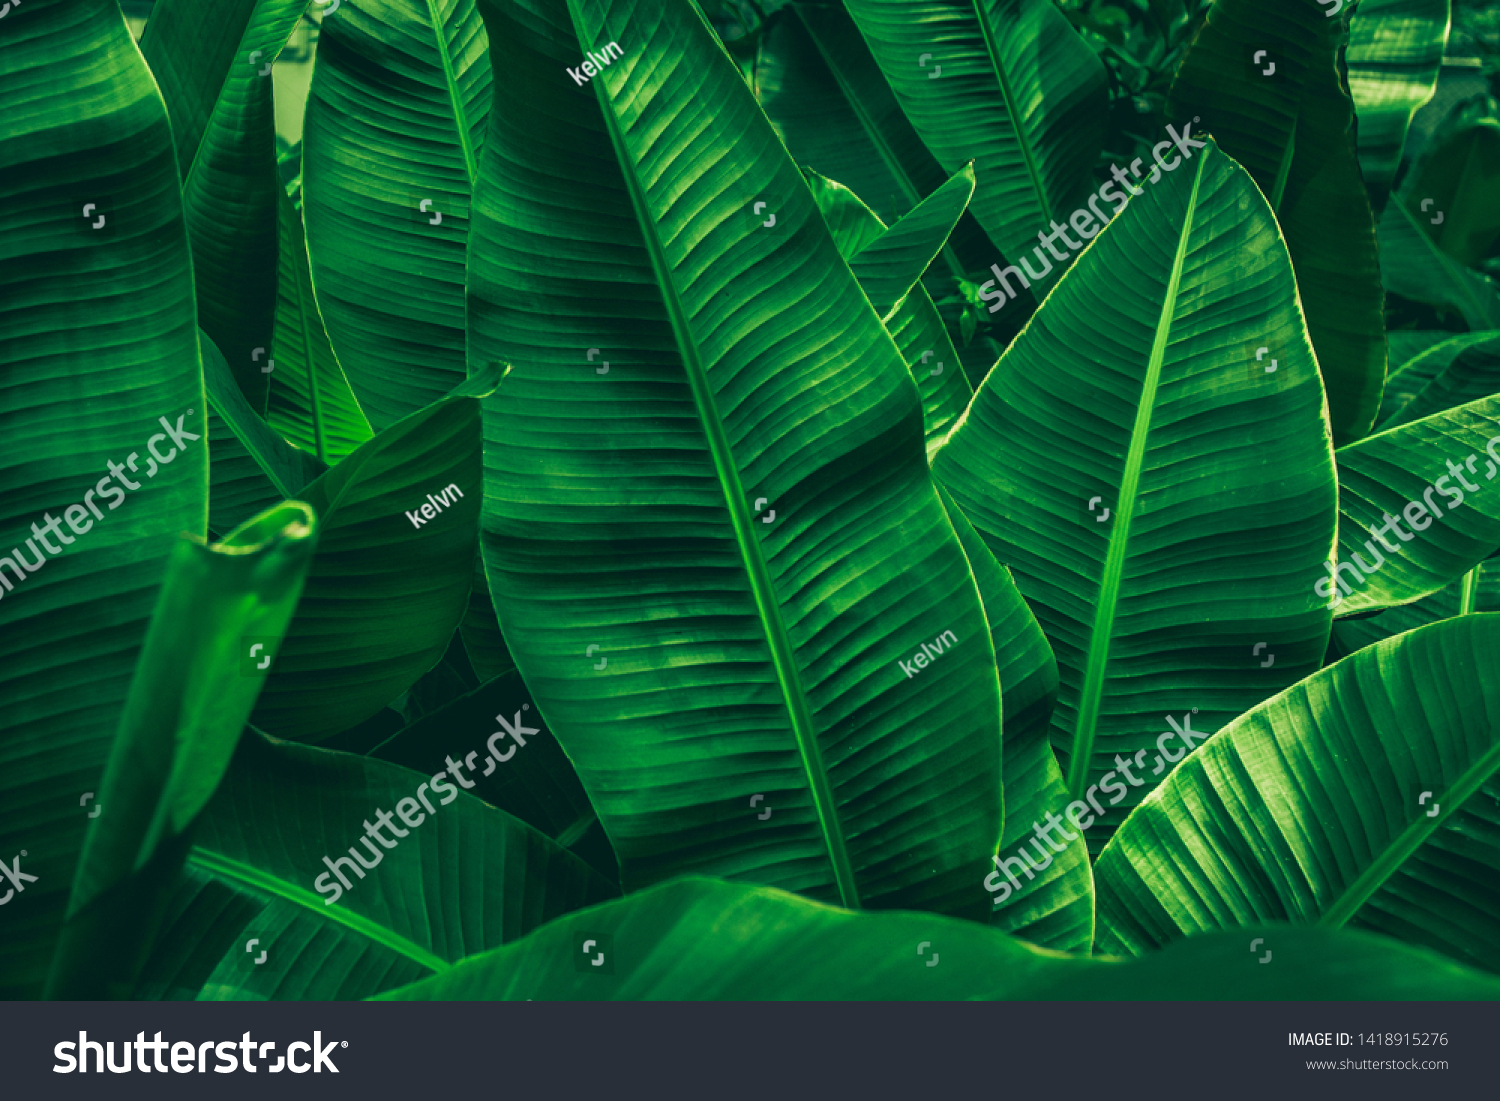 tropical banana leaf texture in garden, abstract green leaf, large palm foliage nature dark green background #1418915276